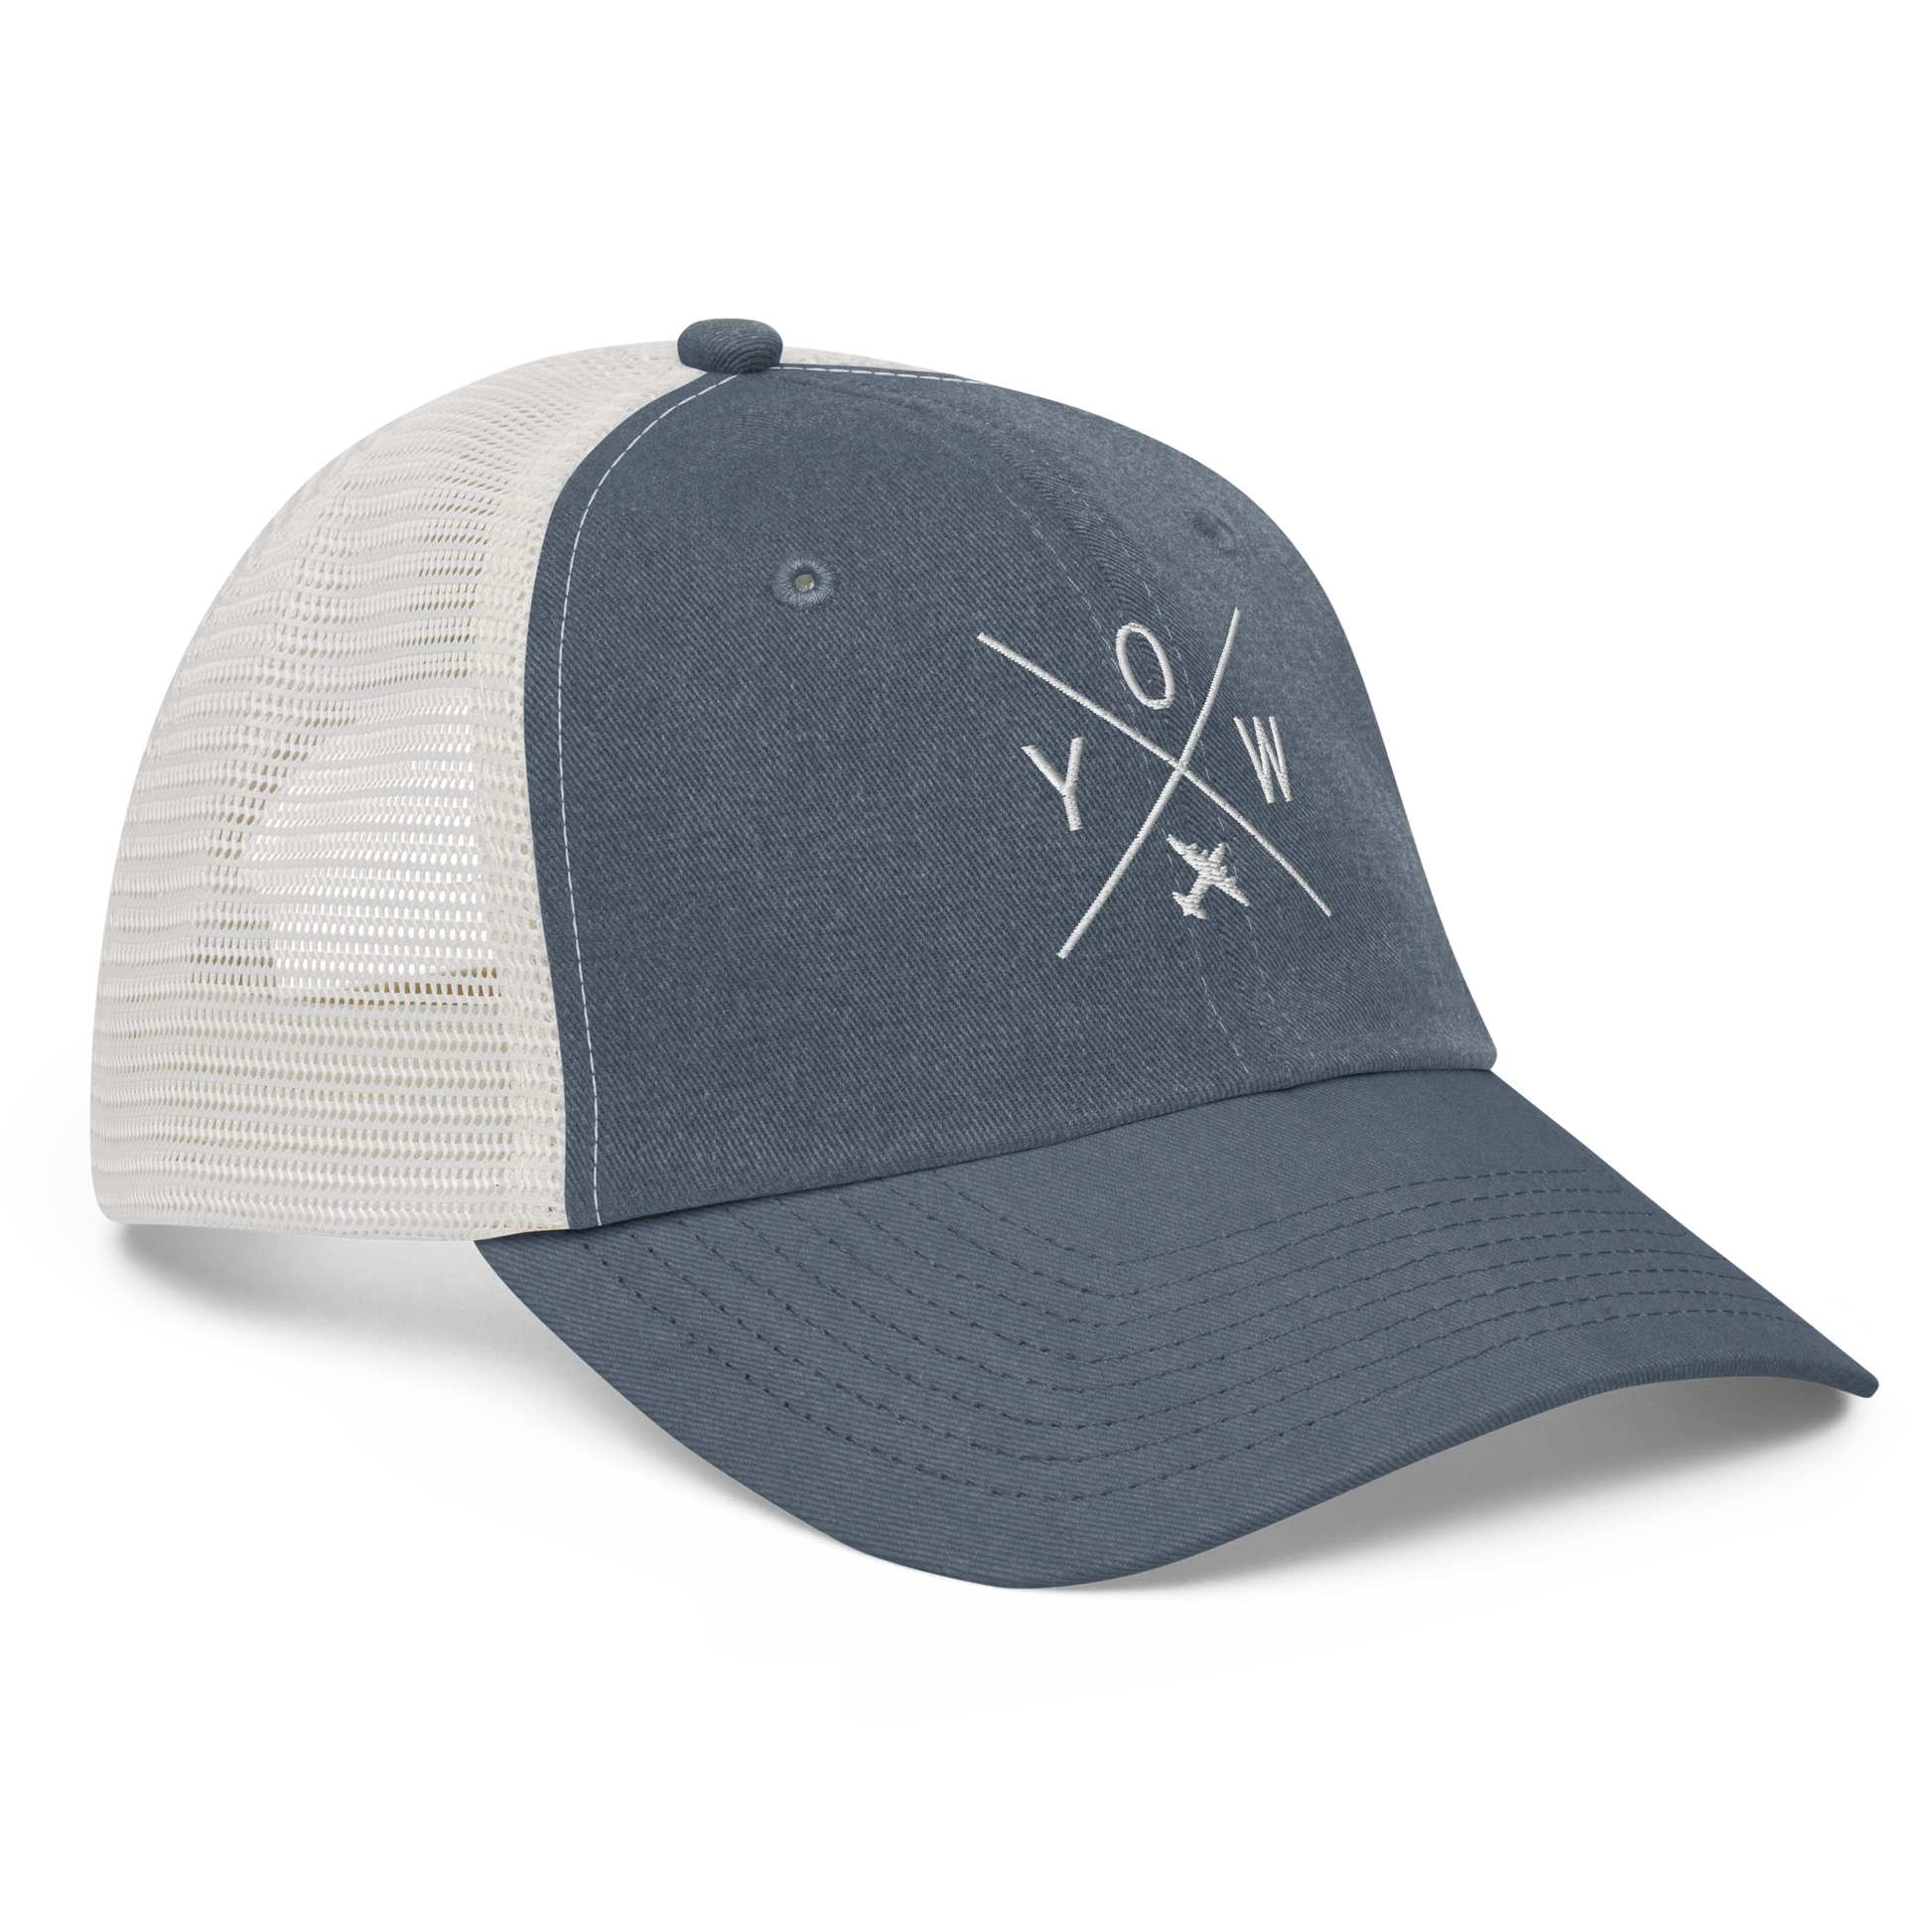 YHM Designs - YOW Ottawa Pigment-Dyed Trucker Cap - Crossed-X Design with Airport Code and Vintage Propliner - White Embroidery - Image 07